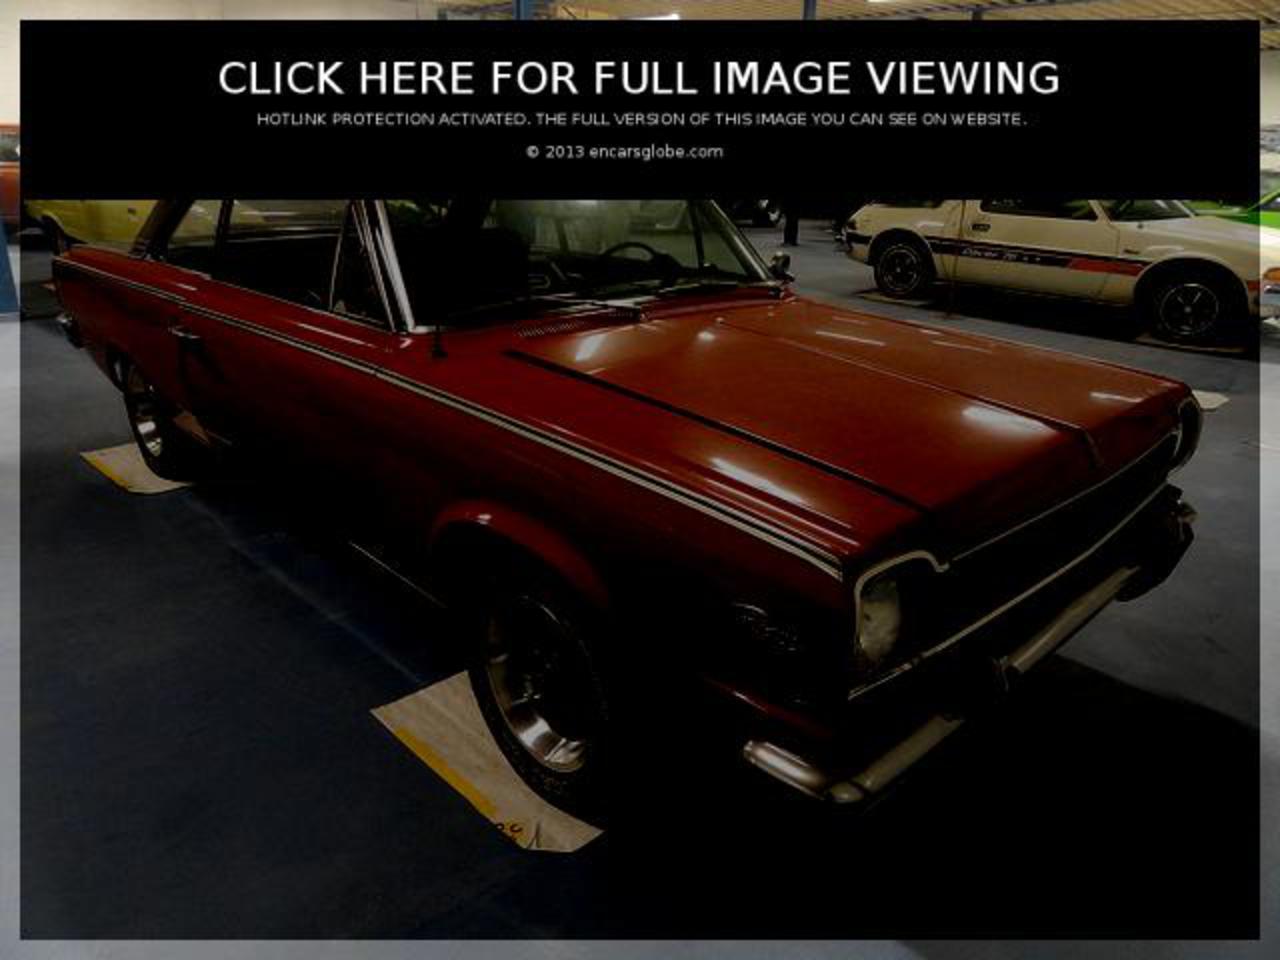 Rambler American 220 2dr Photo Gallery: Photo #11 out of 11, Image ...